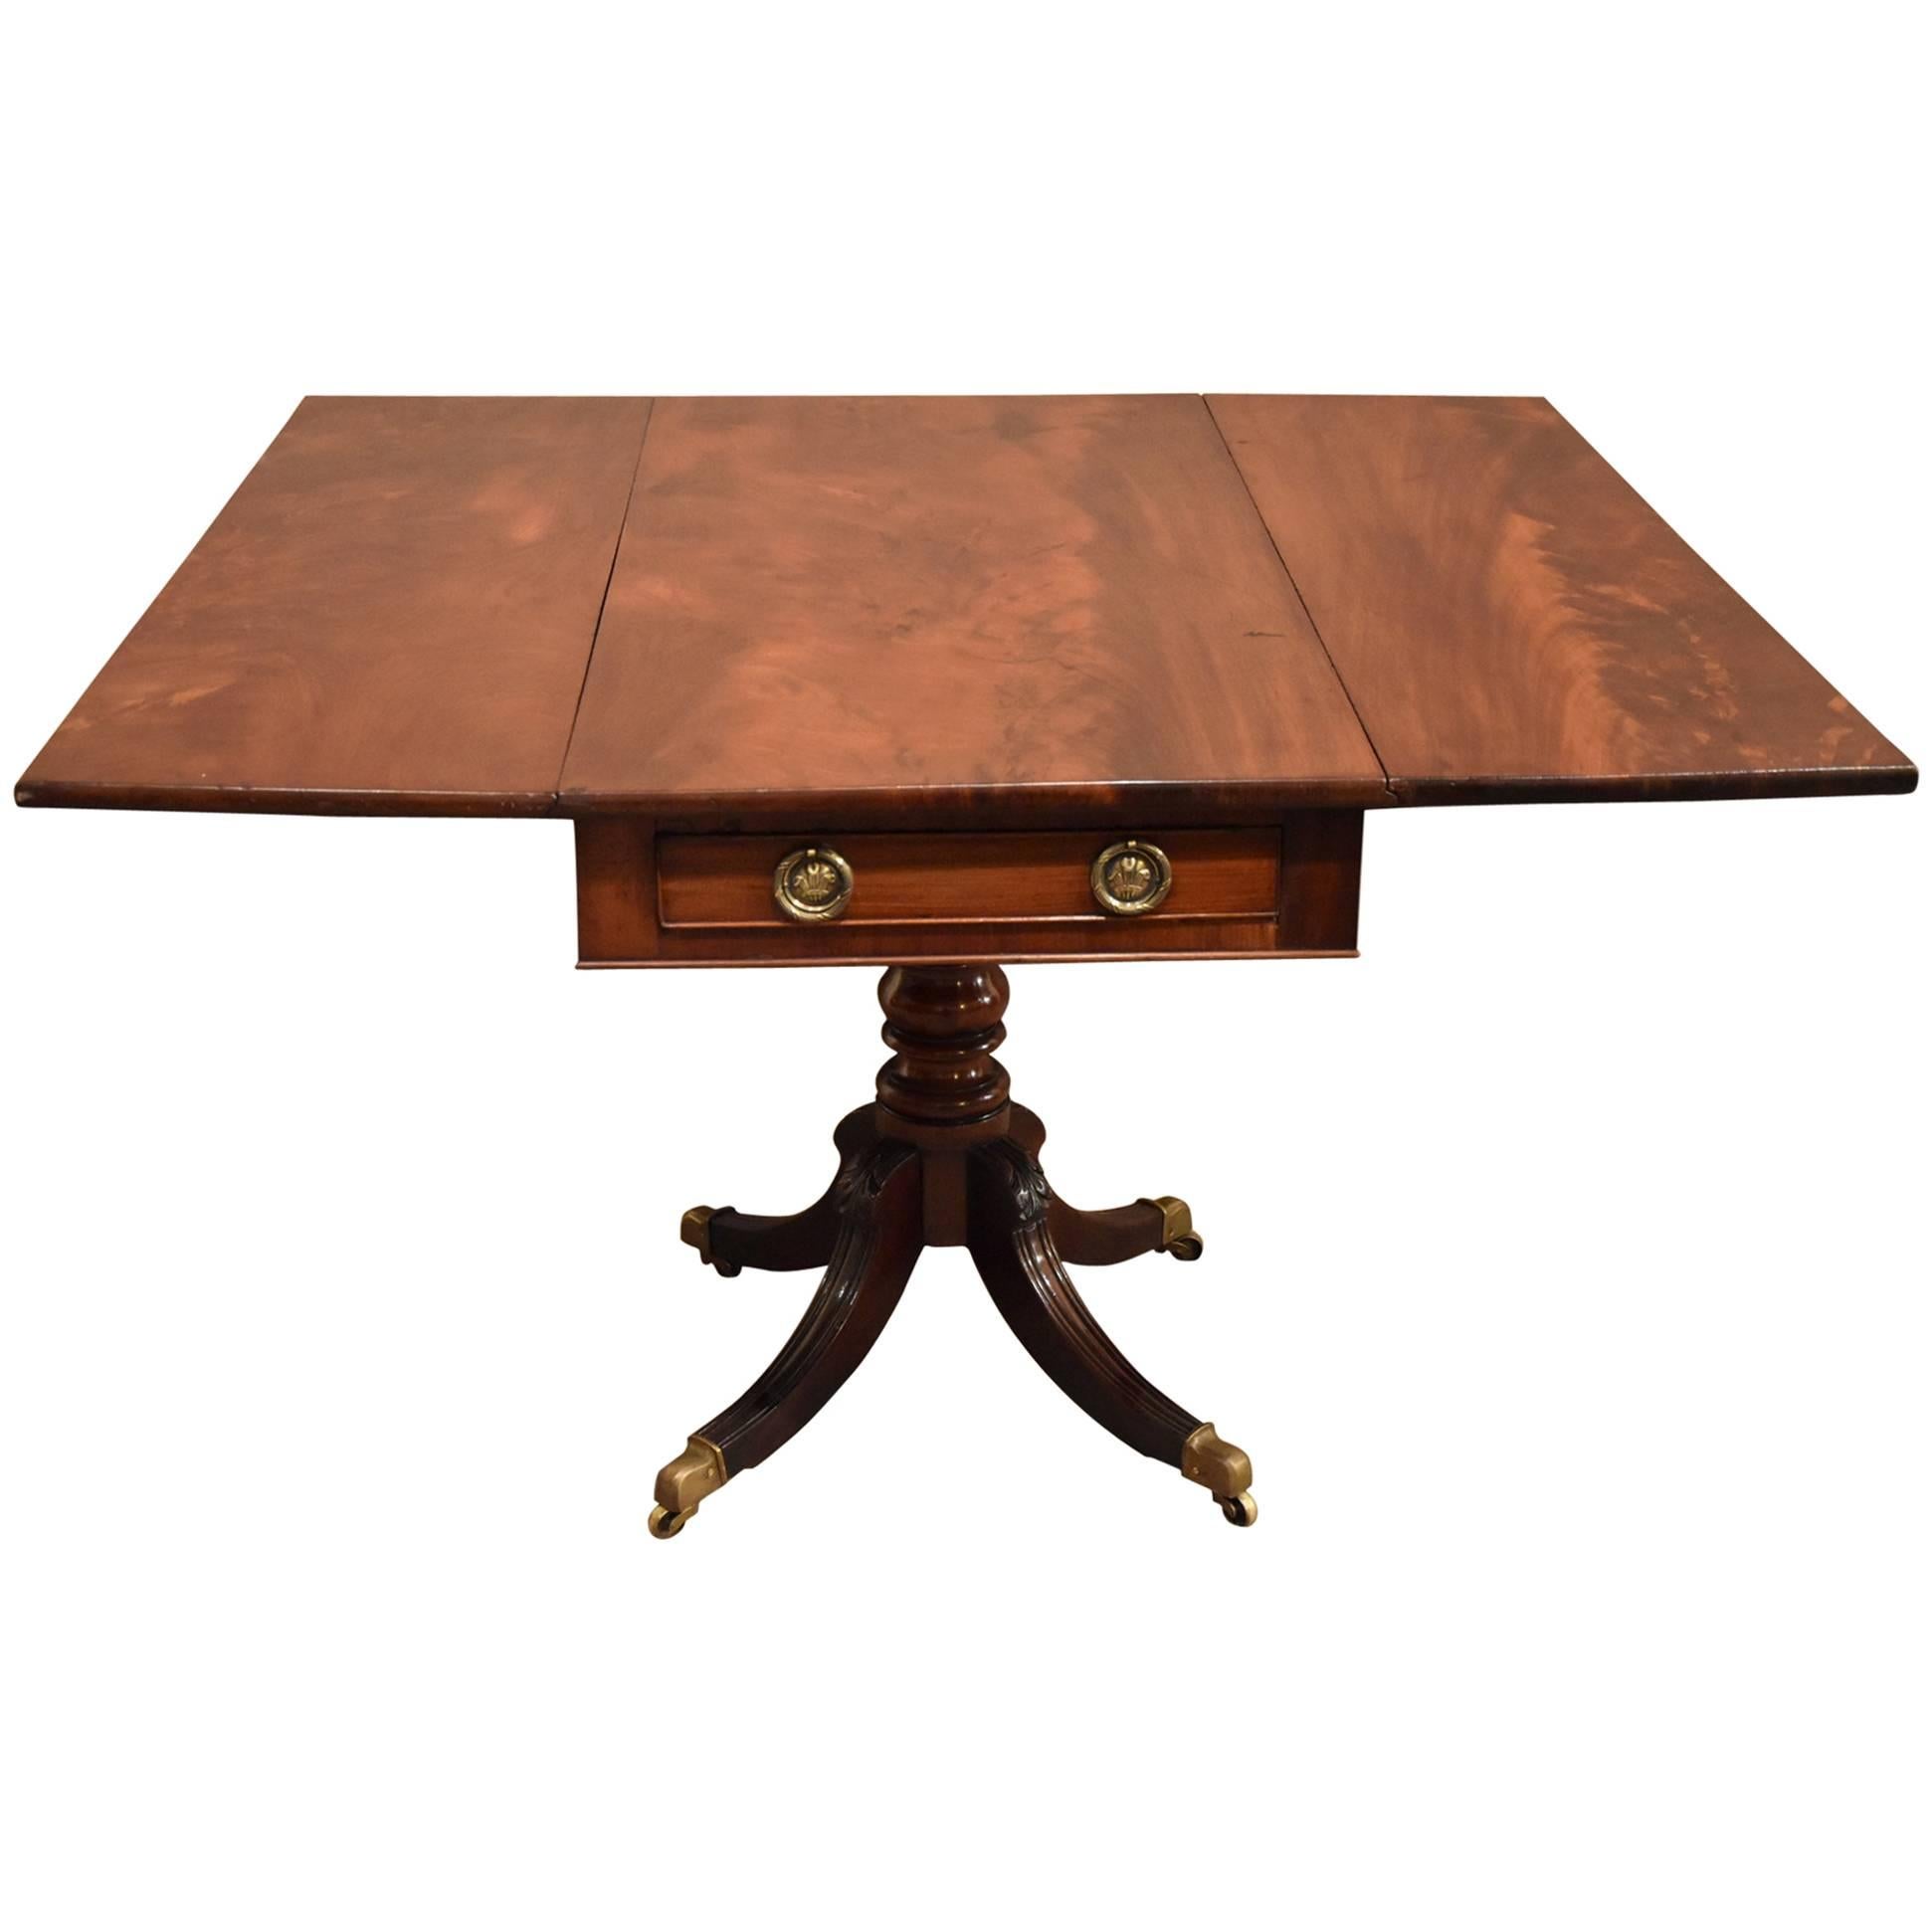 Elegant Regency Period Mahogany Pembroke Table with Flamed Timber For Sale